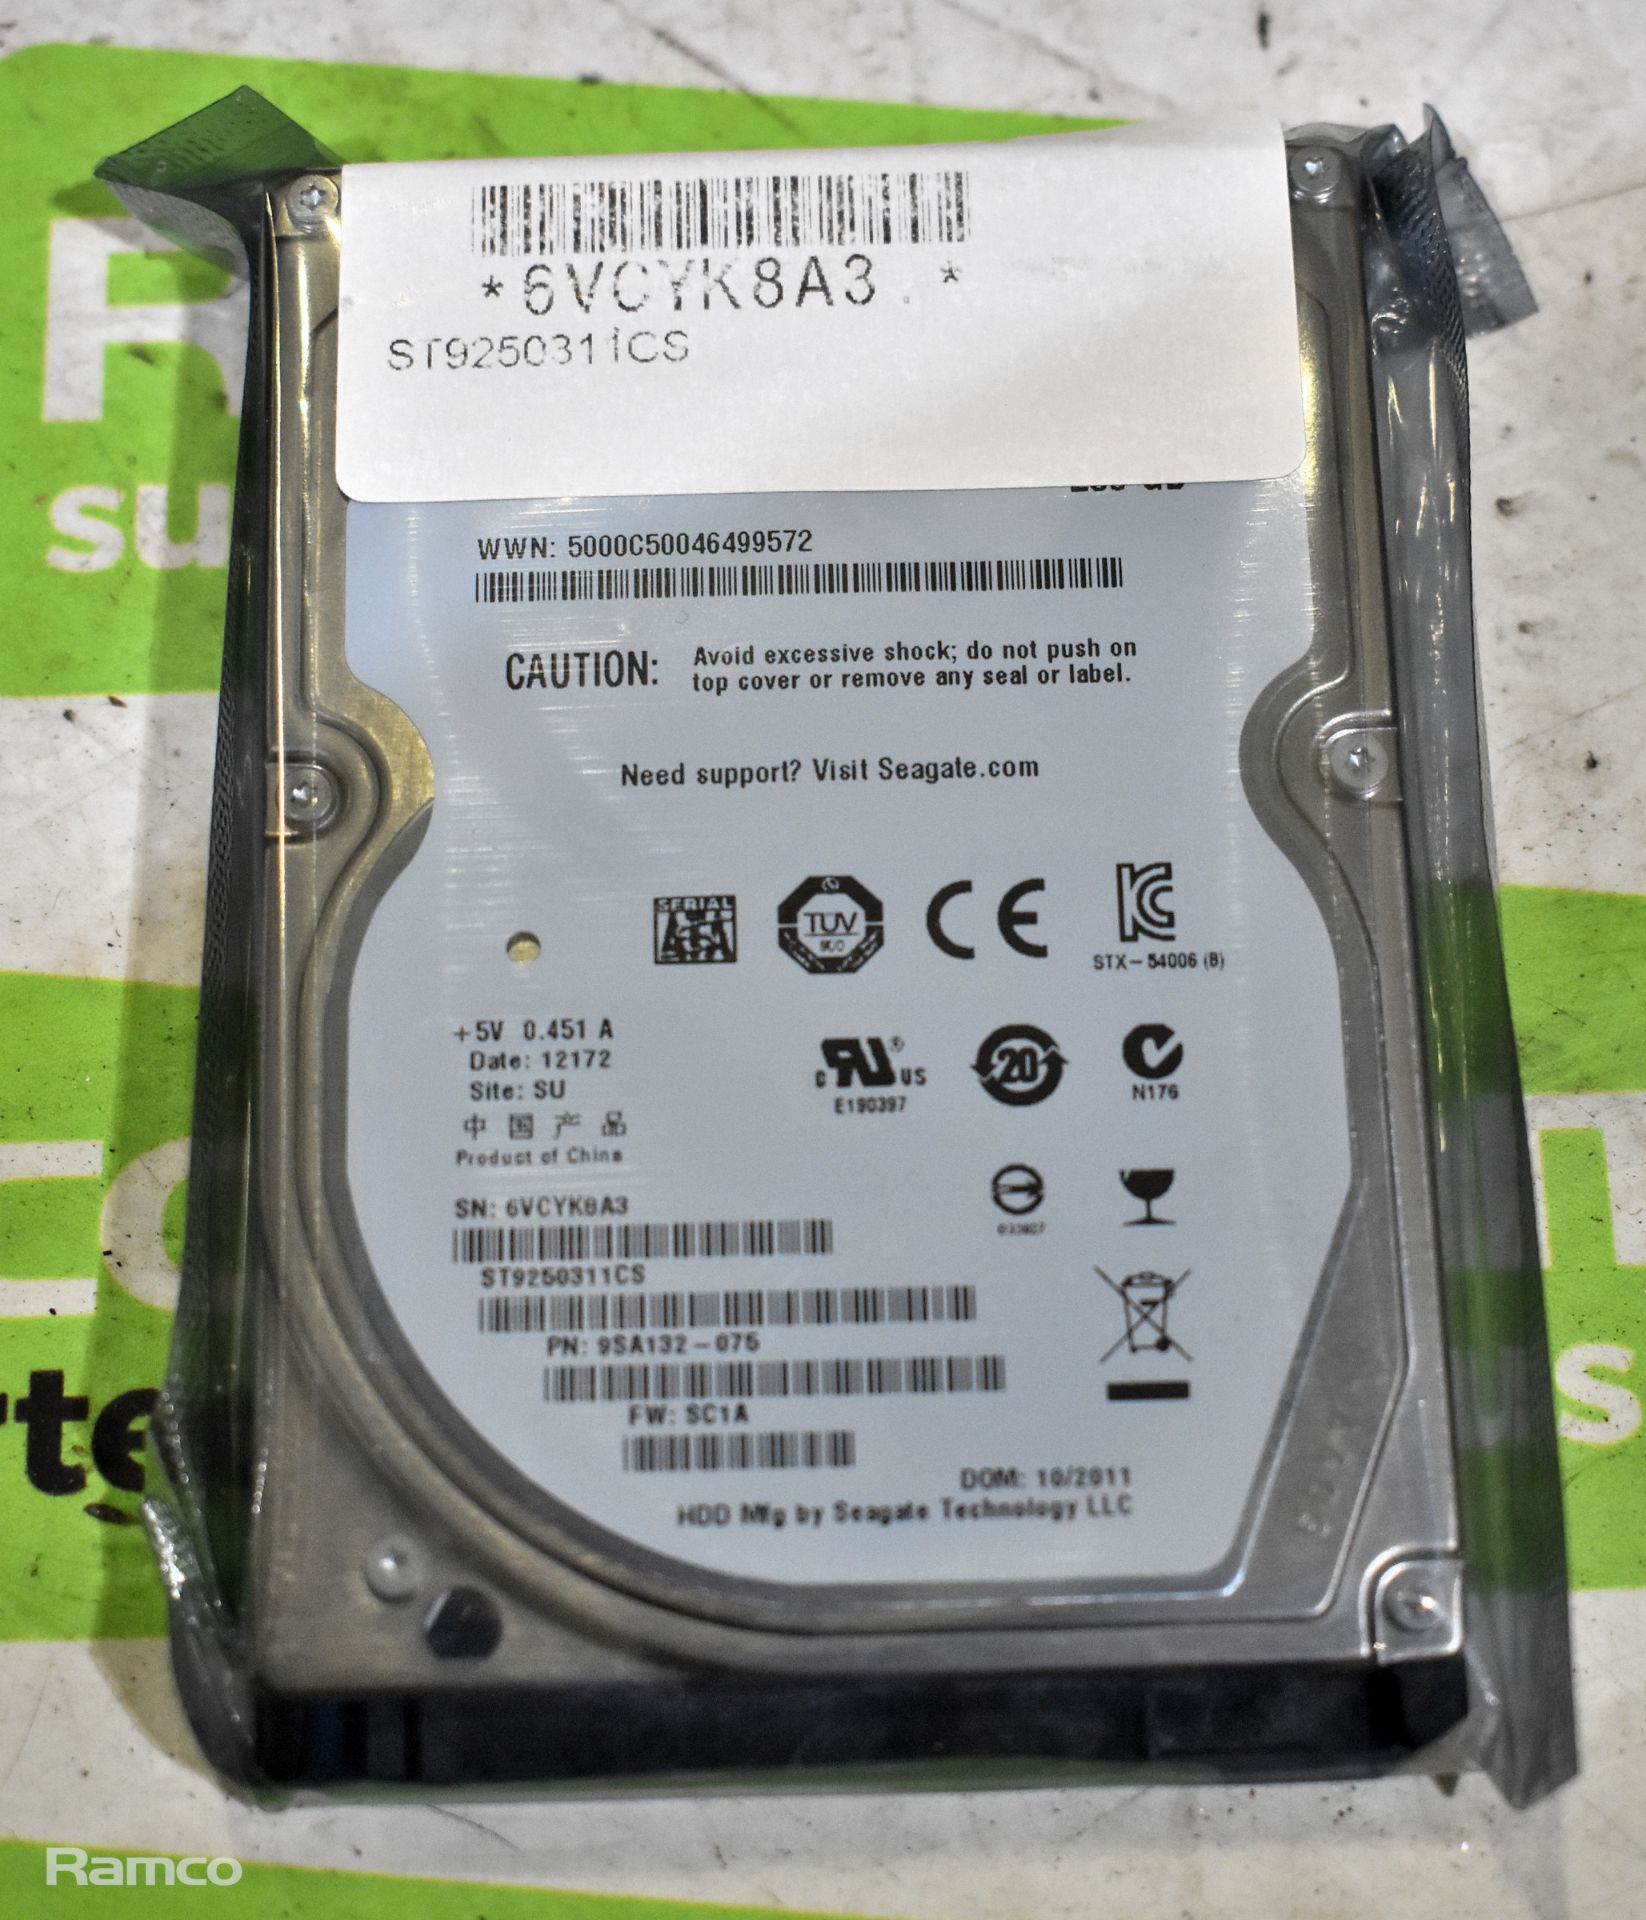 20x Seagate pipeline HD mini 250Gb hard drives for R20 Laptop - Image 2 of 4